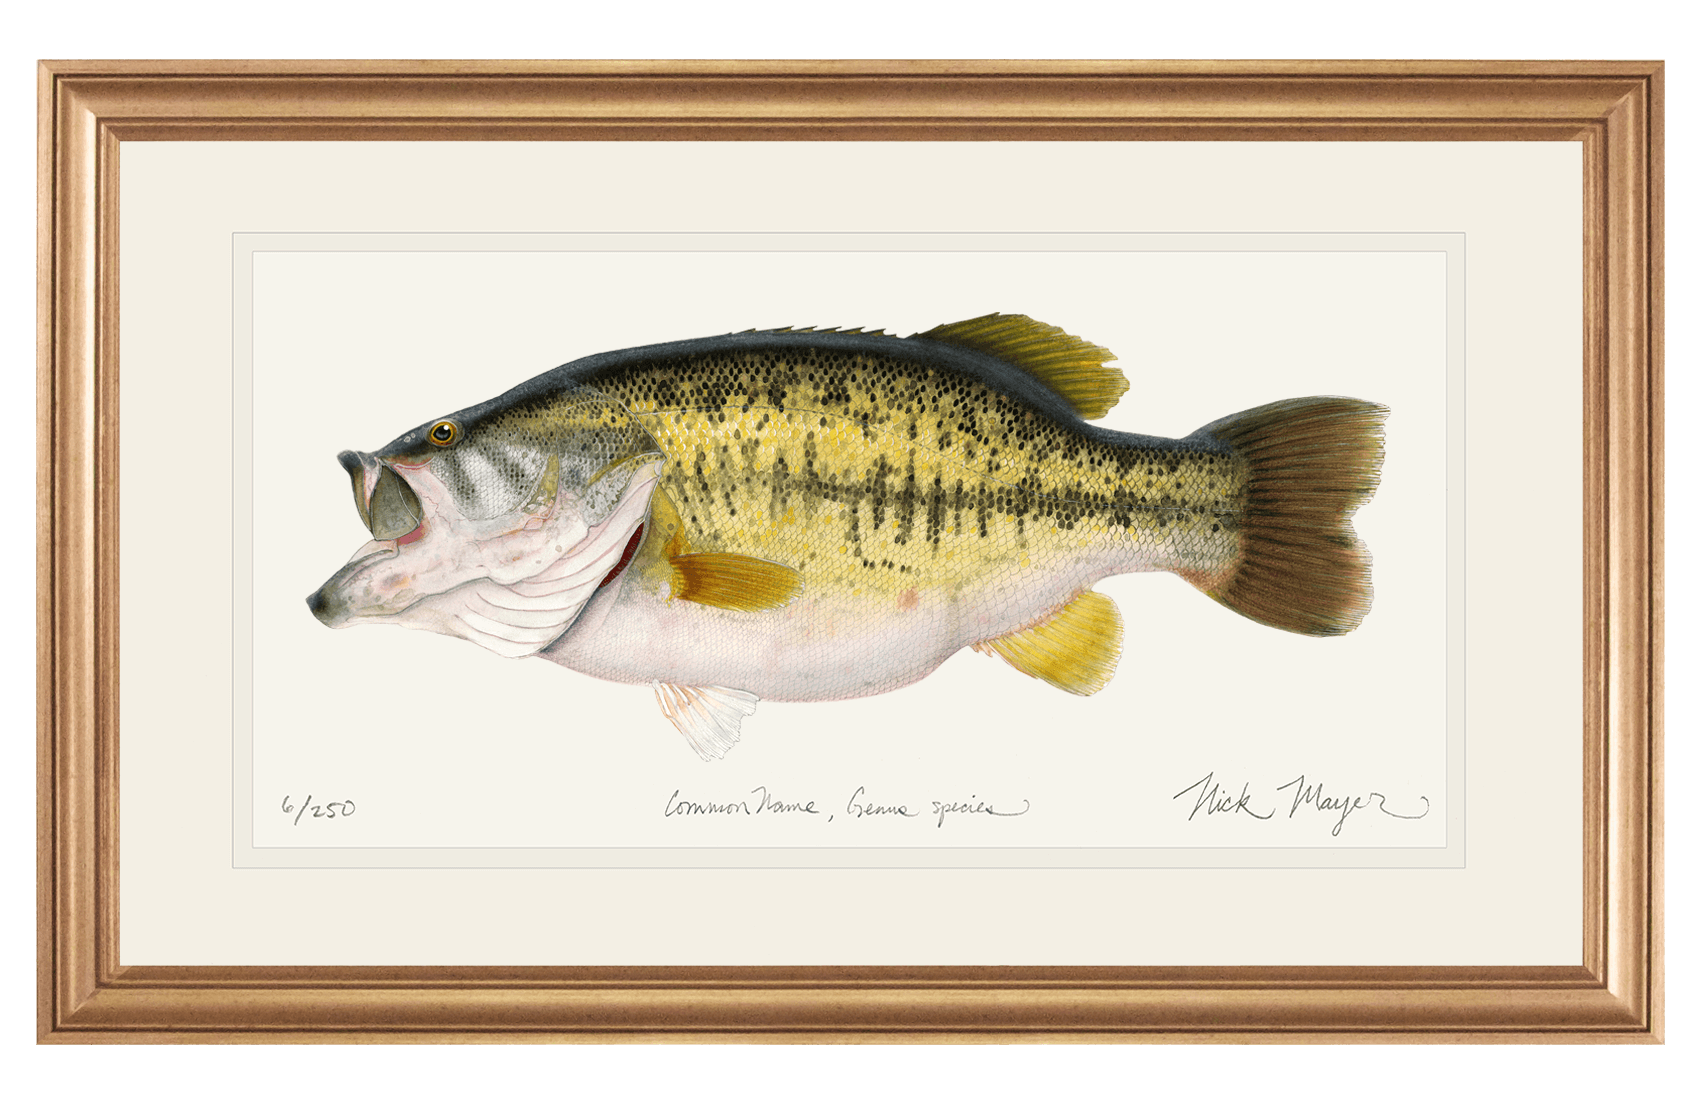 Celebrate America's Gamefish with our Largemouth Bass print